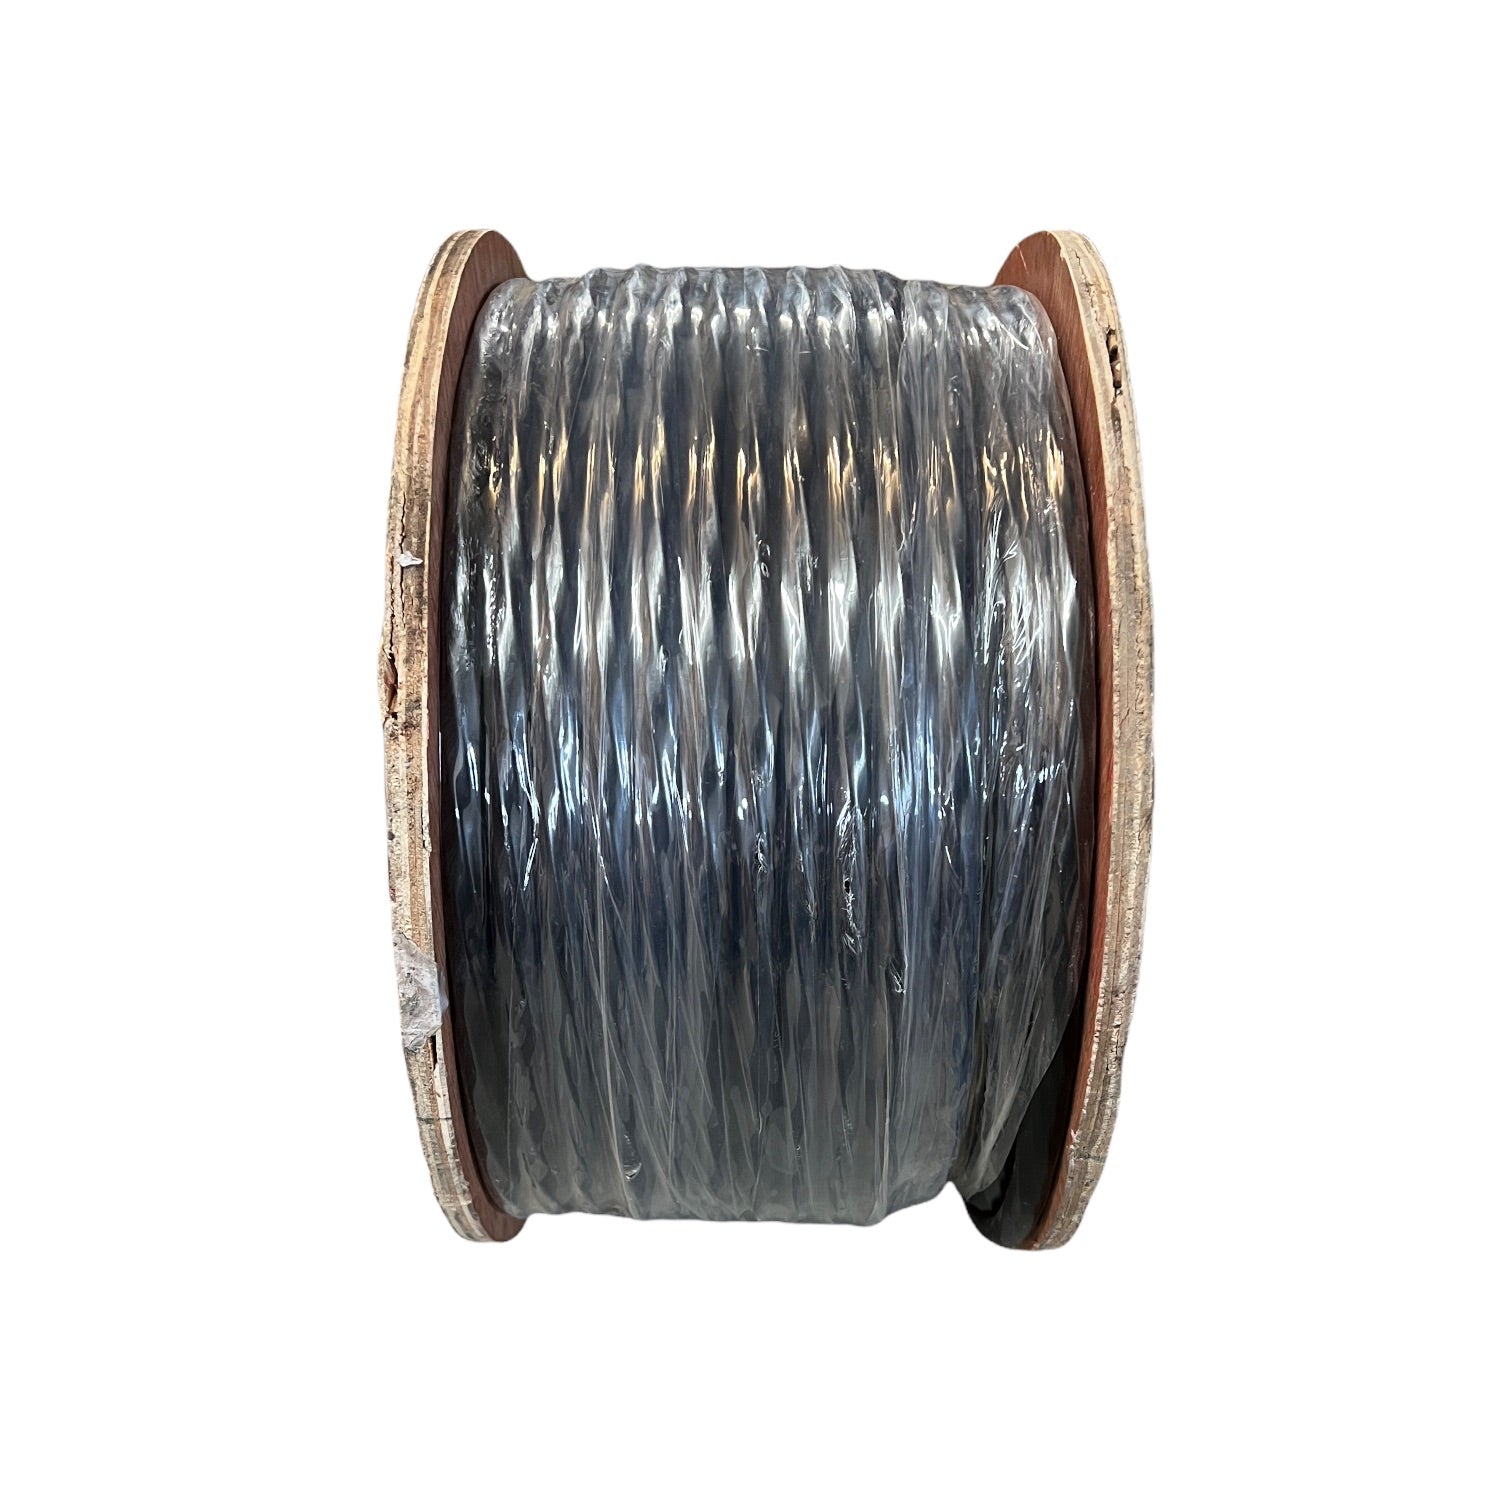 18/10X1000 - Multi-Conductor Irrigation Control Wire, 18 awg, 18/10 X 1000 ft